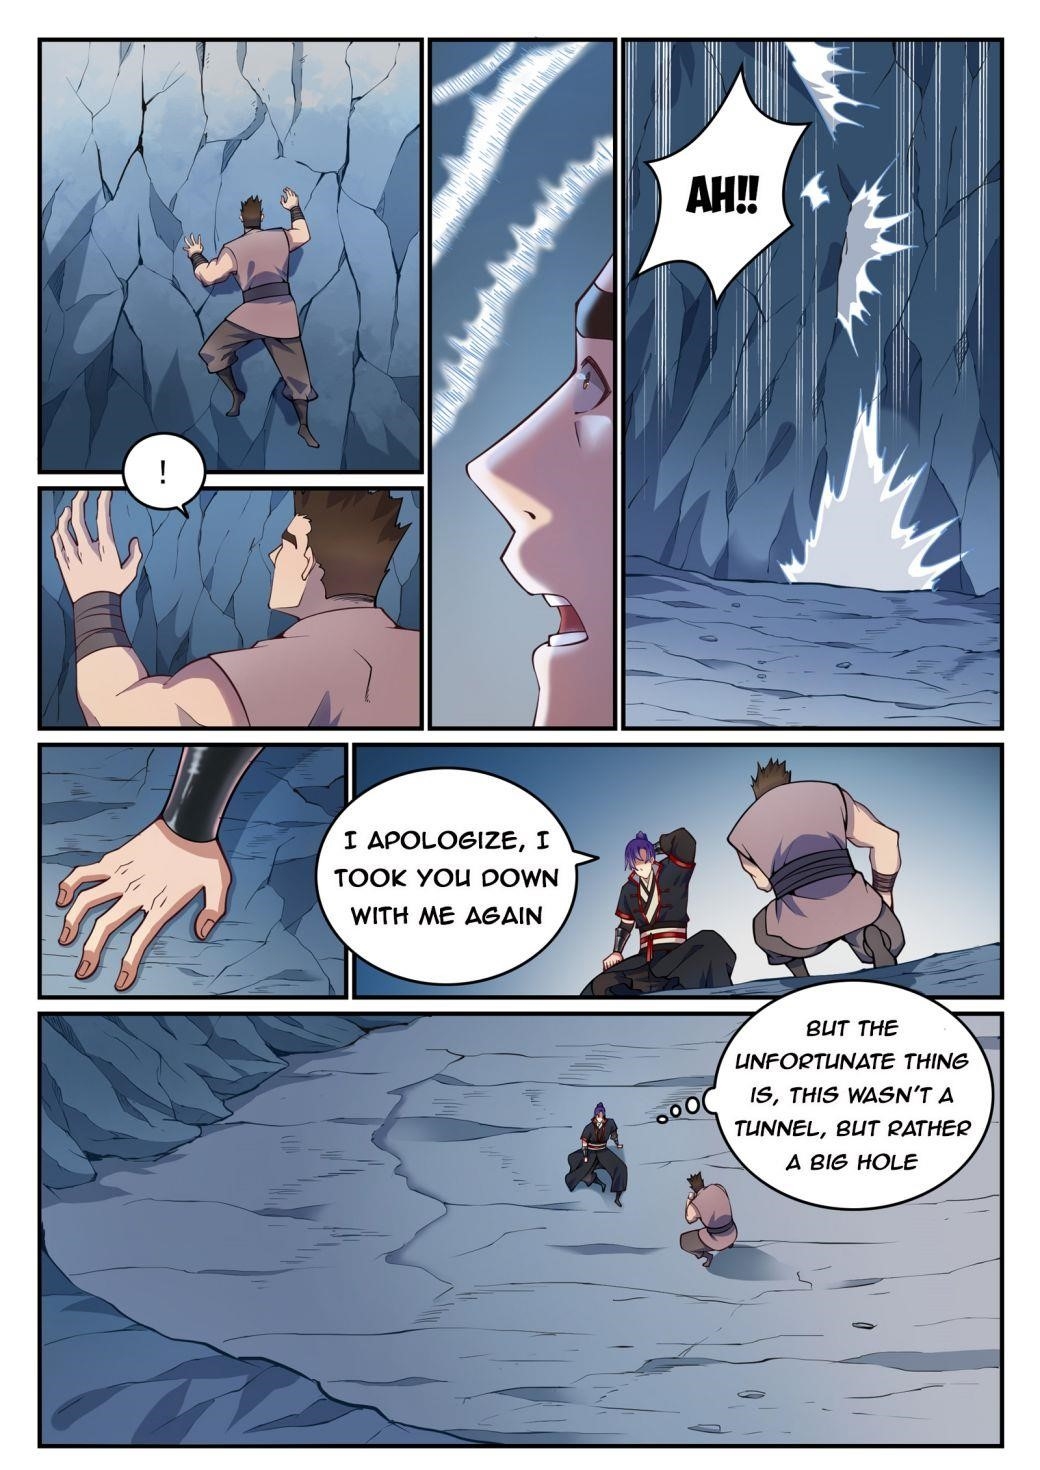 APOTHEOSIS Chapter 738 - Page 4